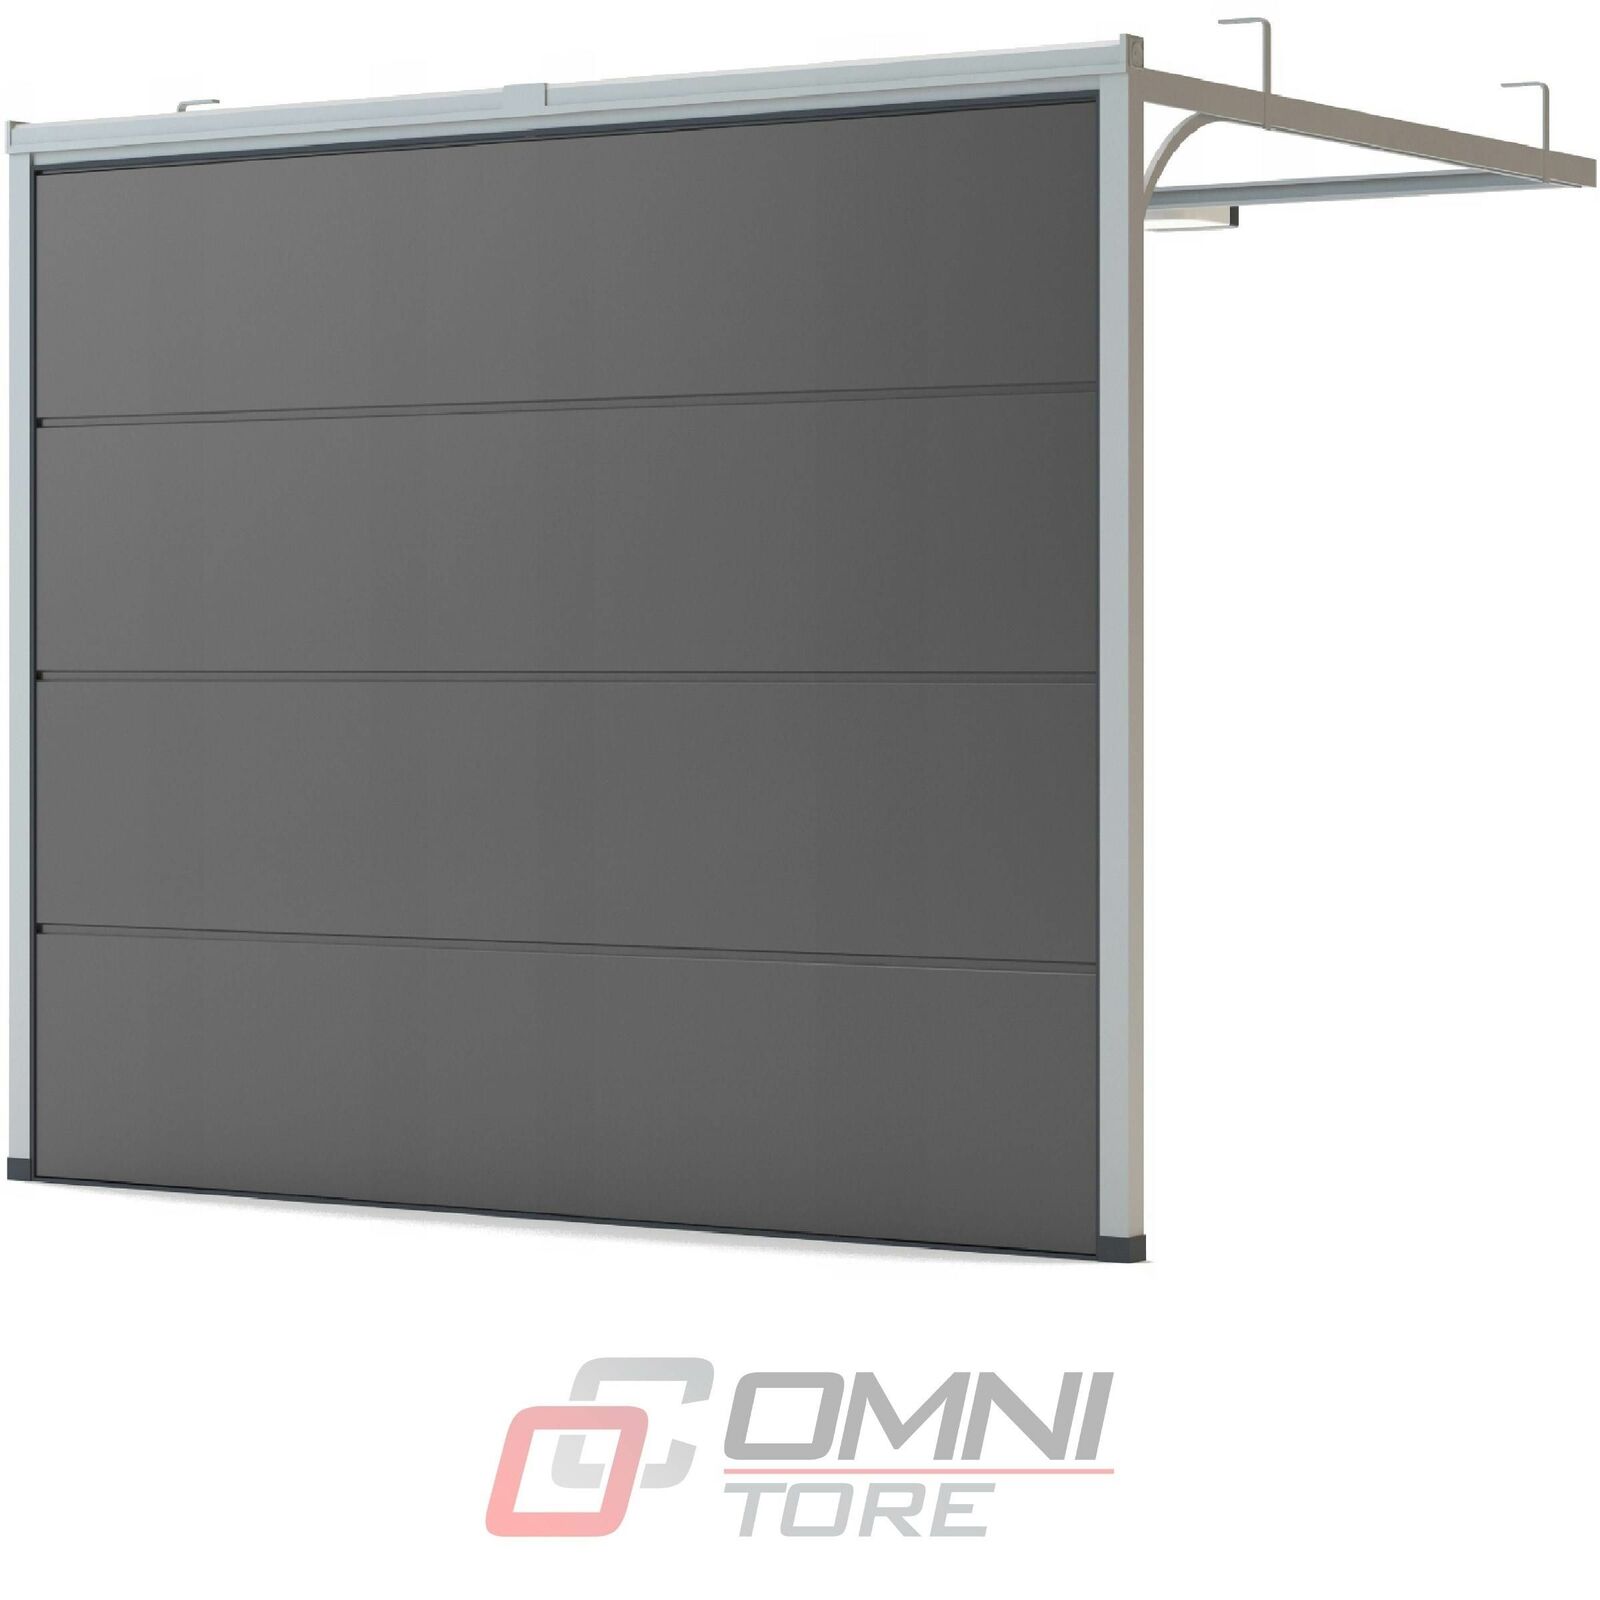 Sectional from Poland Safety Gate 2400 x 2500 mm Garage Door Gat